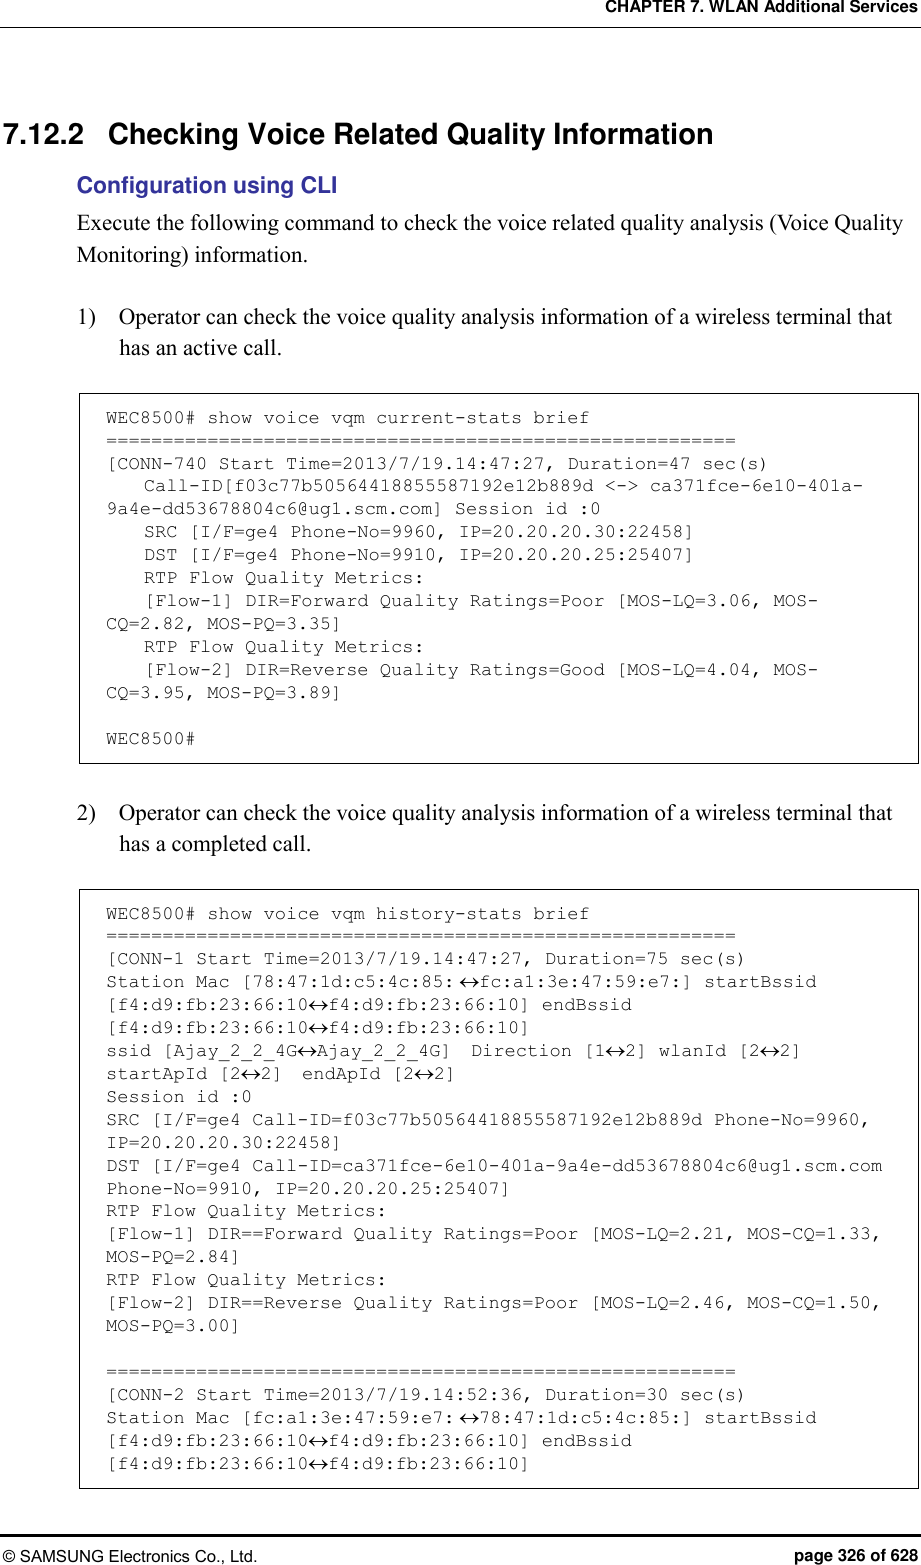 CHAPTER 7. WLAN Additional Services © SAMSUNG Electronics Co., Ltd.  page 326 of 628 7.12.2  Checking Voice Related Quality Information Configuration using CLI Execute the following command to check the voice related quality analysis (Voice Quality Monitoring) information.    1)    Operator can check the voice quality analysis information of a wireless terminal that has an active call.  WEC8500# show voice vqm current-stats brief ======================================================== [CONN-740 Start Time=2013/7/19.14:47:27, Duration=47 sec(s)     Call-ID[f03c77b50564418855587192e12b889d &lt;-&gt; ca371fce-6e10-401a-9a4e-dd53678804c6@ug1.scm.com] Session id :0     SRC [I/F=ge4 Phone-No=9960, IP=20.20.20.30:22458]     DST [I/F=ge4 Phone-No=9910, IP=20.20.20.25:25407]     RTP Flow Quality Metrics:     [Flow-1] DIR=Forward Quality Ratings=Poor [MOS-LQ=3.06, MOS-CQ=2.82, MOS-PQ=3.35]     RTP Flow Quality Metrics:     [Flow-2] DIR=Reverse Quality Ratings=Good [MOS-LQ=4.04, MOS-CQ=3.95, MOS-PQ=3.89]  WEC8500#  2)    Operator can check the voice quality analysis information of a wireless terminal that has a completed call.  WEC8500# show voice vqm history-stats brief ======================================================== [CONN-1 Start Time=2013/7/19.14:47:27, Duration=75 sec(s) Station Mac [78:47:1d:c5:4c:85:fc:a1:3e:47:59:e7:] startBssid [f4:d9:fb:23:66:10f4:d9:fb:23:66:10] endBssid [f4:d9:fb:23:66:10f4:d9:fb:23:66:10] ssid [Ajay_2_2_4GAjay_2_2_4G]  Direction [12] wlanId [22] startApId [22]  endApId [22] Session id :0 SRC [I/F=ge4 Call-ID=f03c77b50564418855587192e12b889d Phone-No=9960, IP=20.20.20.30:22458] DST [I/F=ge4 Call-ID=ca371fce-6e10-401a-9a4e-dd53678804c6@ug1.scm.com Phone-No=9910, IP=20.20.20.25:25407] RTP Flow Quality Metrics: [Flow-1] DIR==Forward Quality Ratings=Poor [MOS-LQ=2.21, MOS-CQ=1.33, MOS-PQ=2.84] RTP Flow Quality Metrics: [Flow-2] DIR==Reverse Quality Ratings=Poor [MOS-LQ=2.46, MOS-CQ=1.50, MOS-PQ=3.00]  ======================================================== [CONN-2 Start Time=2013/7/19.14:52:36, Duration=30 sec(s) Station Mac [fc:a1:3e:47:59:e7:78:47:1d:c5:4c:85:] startBssid [f4:d9:fb:23:66:10f4:d9:fb:23:66:10] endBssid [f4:d9:fb:23:66:10f4:d9:fb:23:66:10] 